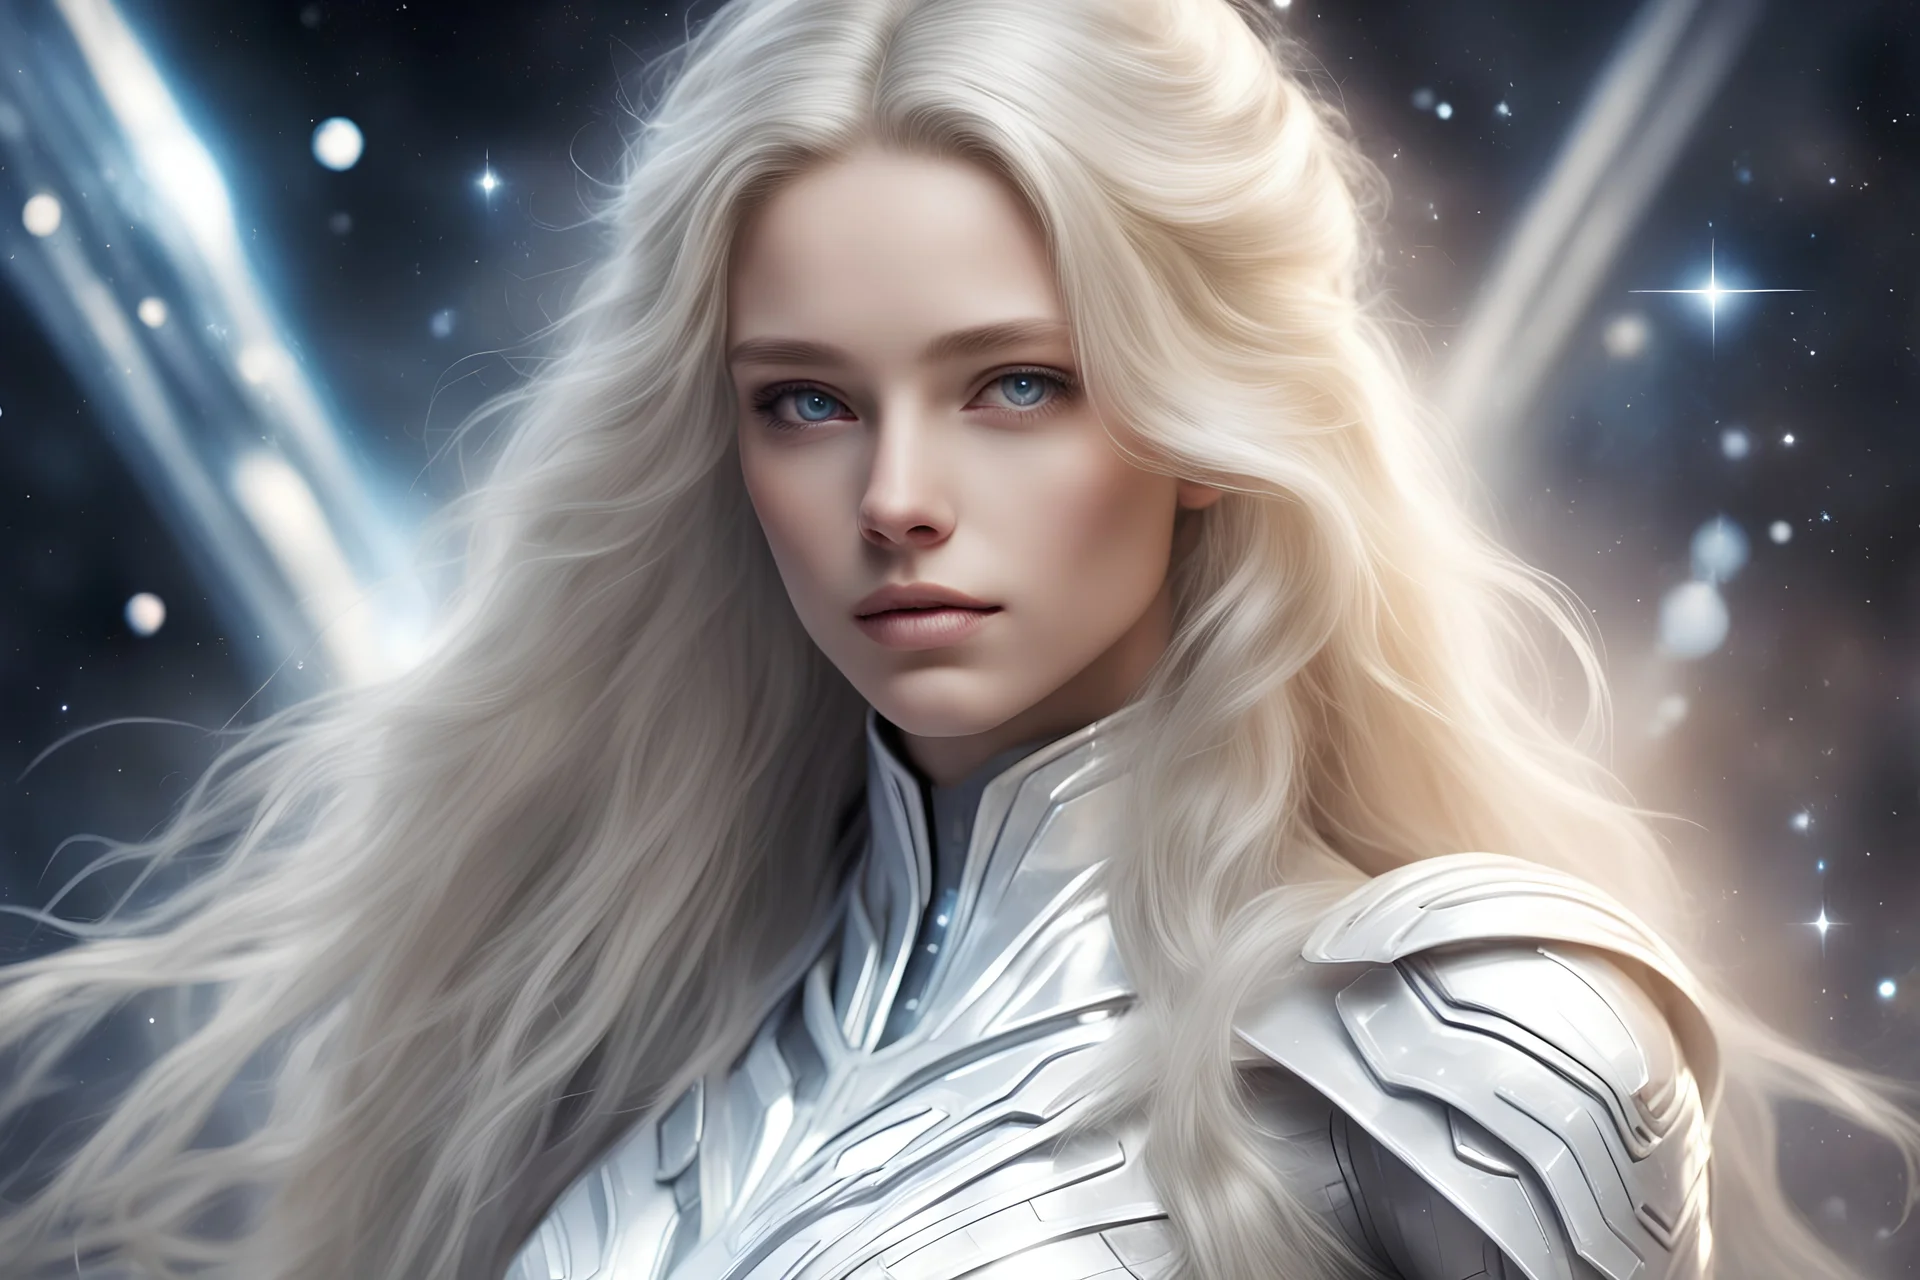 a young woman, white and silver galactic costume, kindness, gentle,blond long hair, perfect face, kindness,